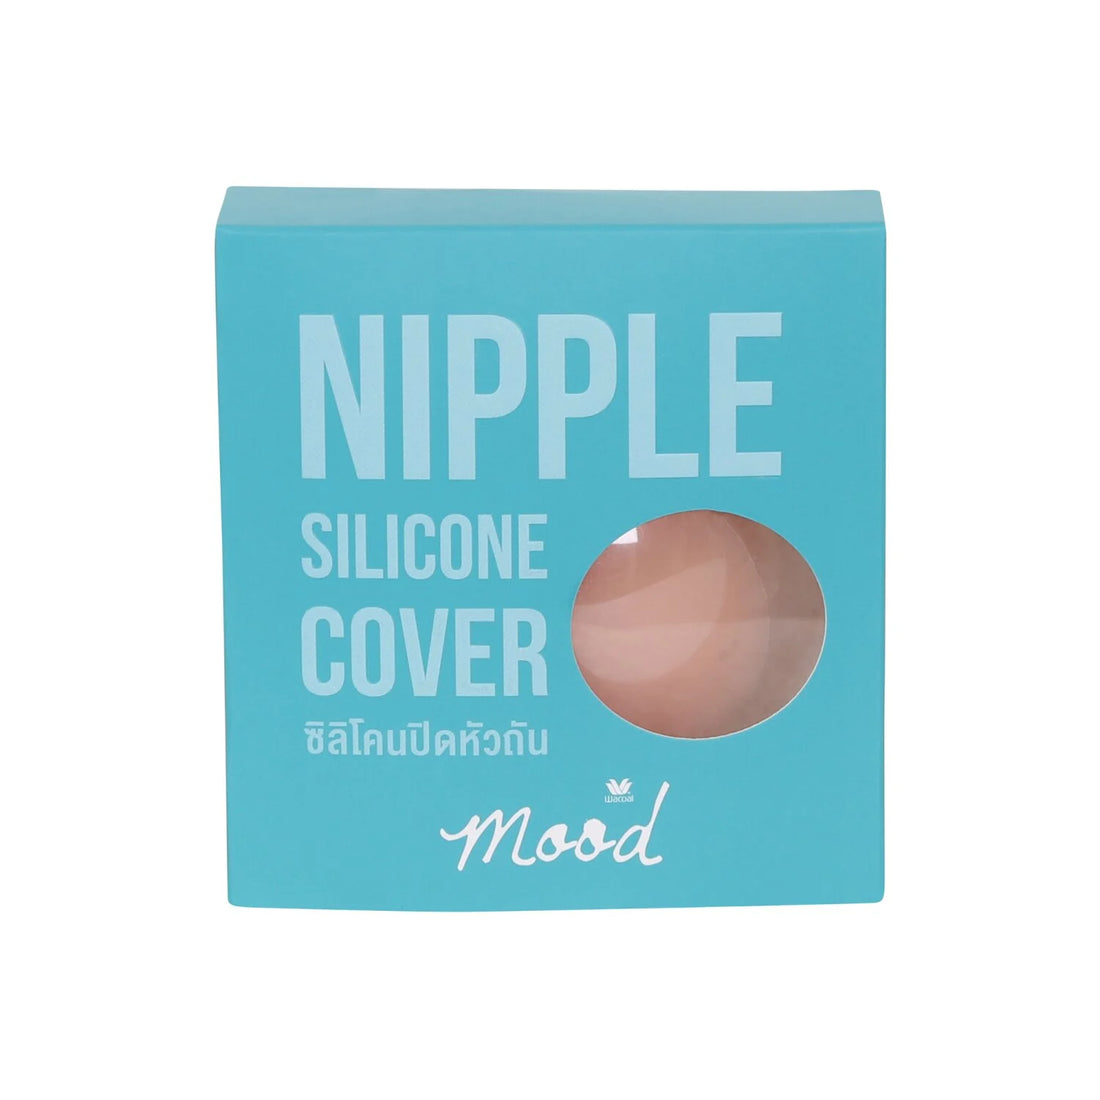 Wacoal Mood Accessories Nipple Sillicone Cover Set 2 boxes Model MM9051